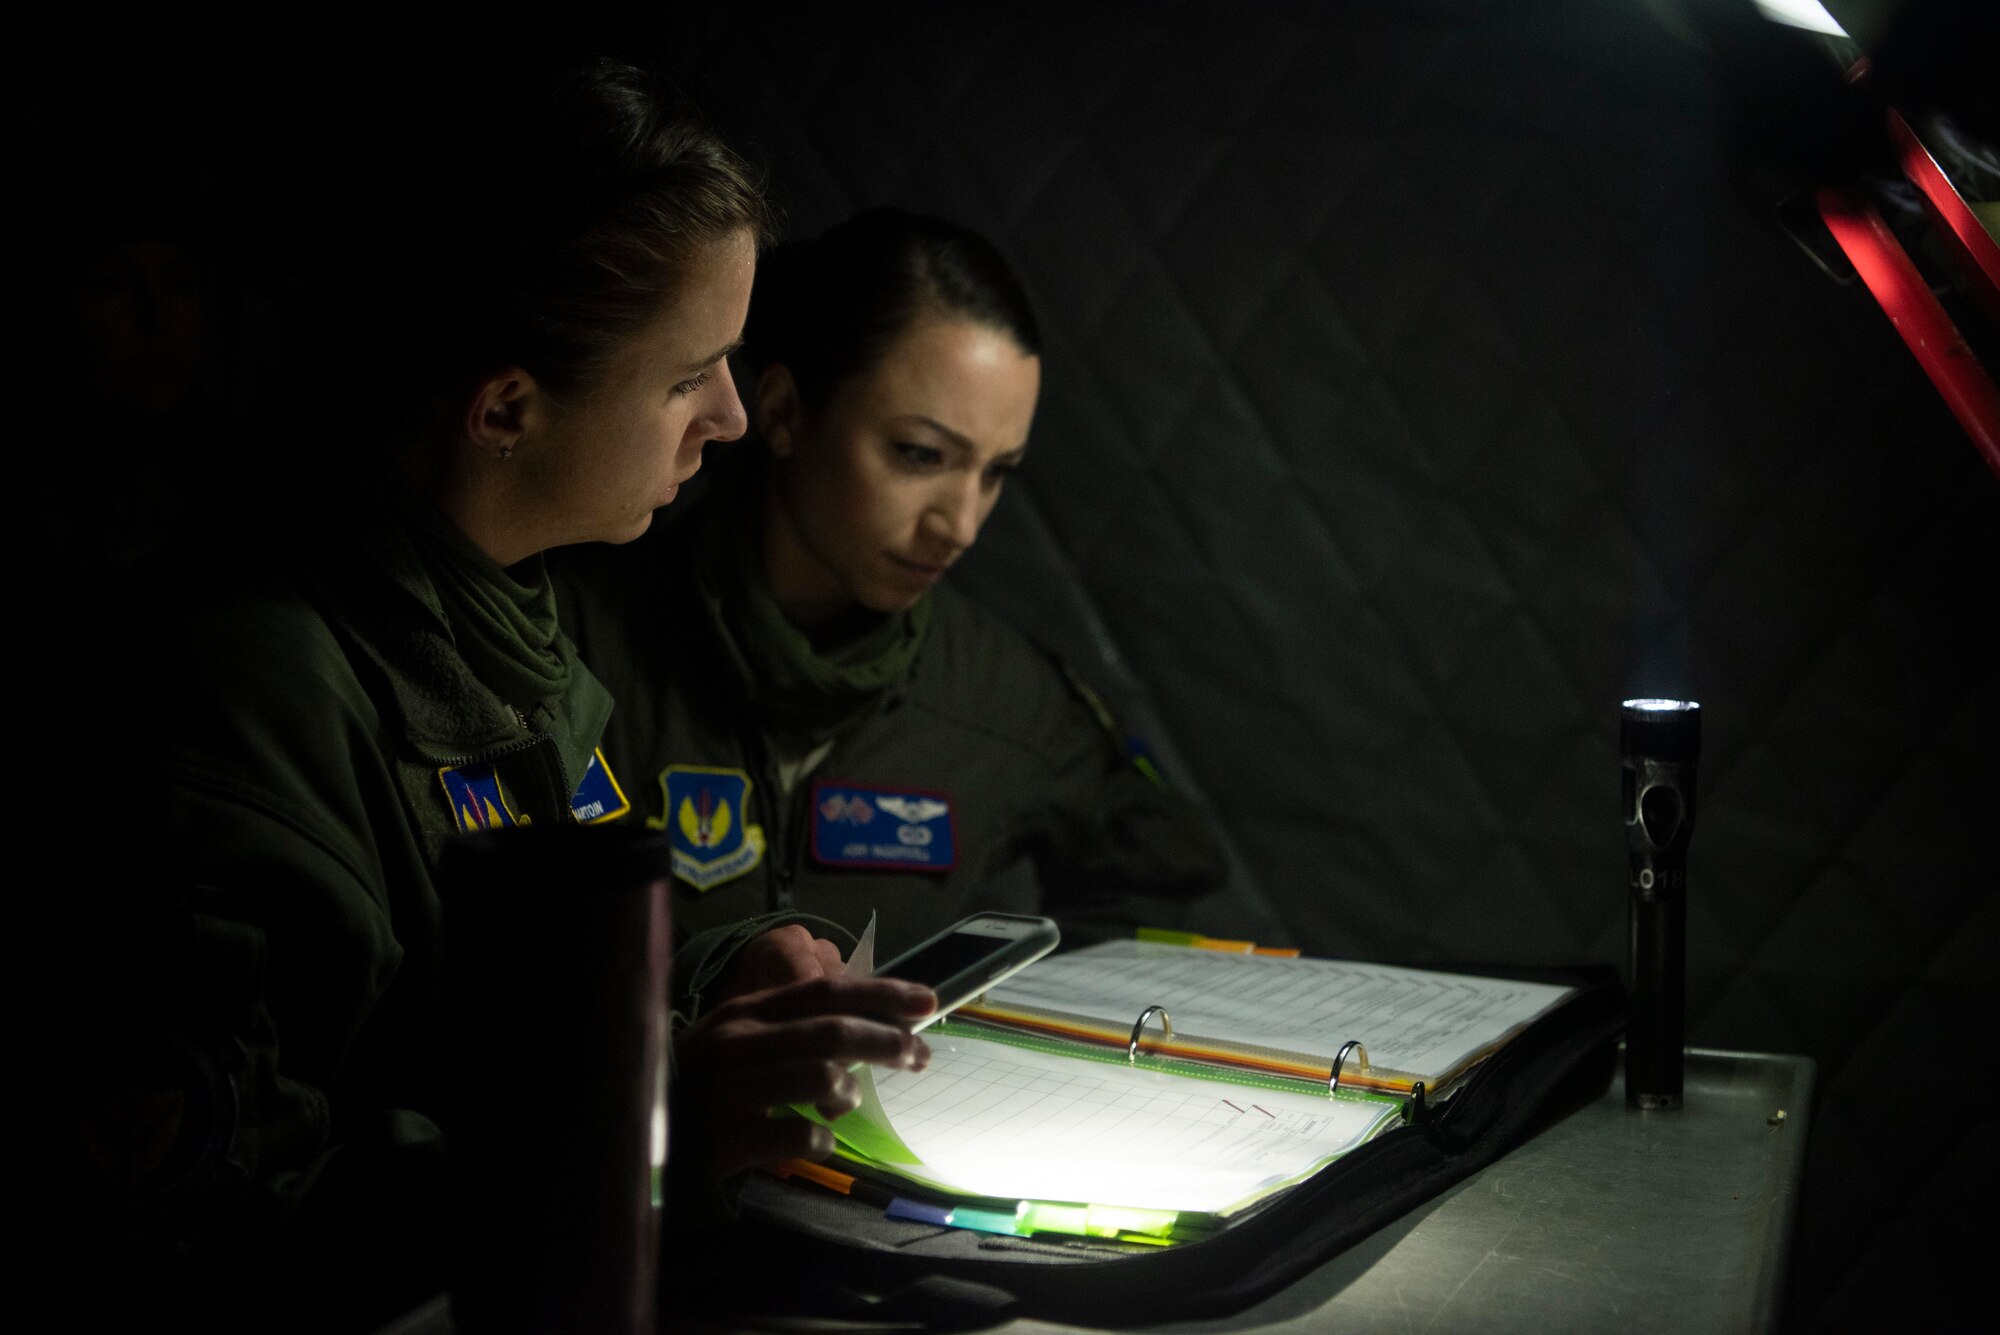 Capt. Marissa Hartoin, 100th Operations Support Squadron chief of wing tactics and instructor pilot, left, and Capt. Jori Ingersoll, 351st Air Refueling Squadron pilot, review KC-135 Stratotanker maintenance records before supporting a strategic bomber mission at RAF Mildenhall, England, June 18, 2020. The 100th Air Refueling Wing provides rapid aerial refueling throughout the U.S. Air Forces in Europe and Air Forces Africa theater. (U.S. Air Force photo by Airman 1st Class Joseph Barron)